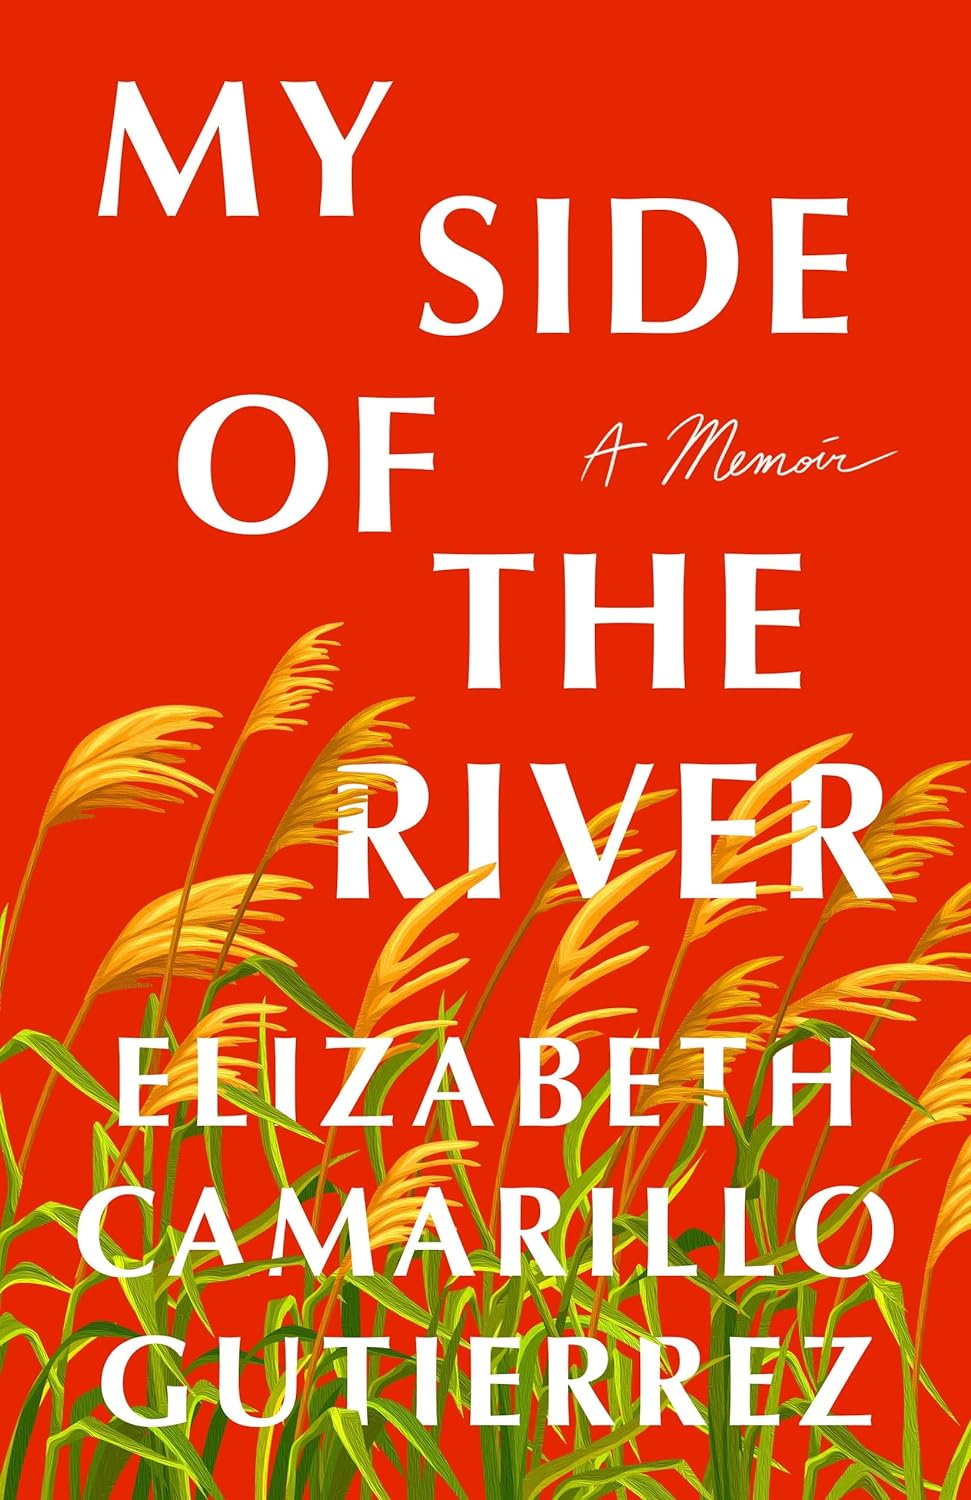 a graphic of the cover of My Side of the River: A Memoir by Elizabeth Camarillo Gutierrez